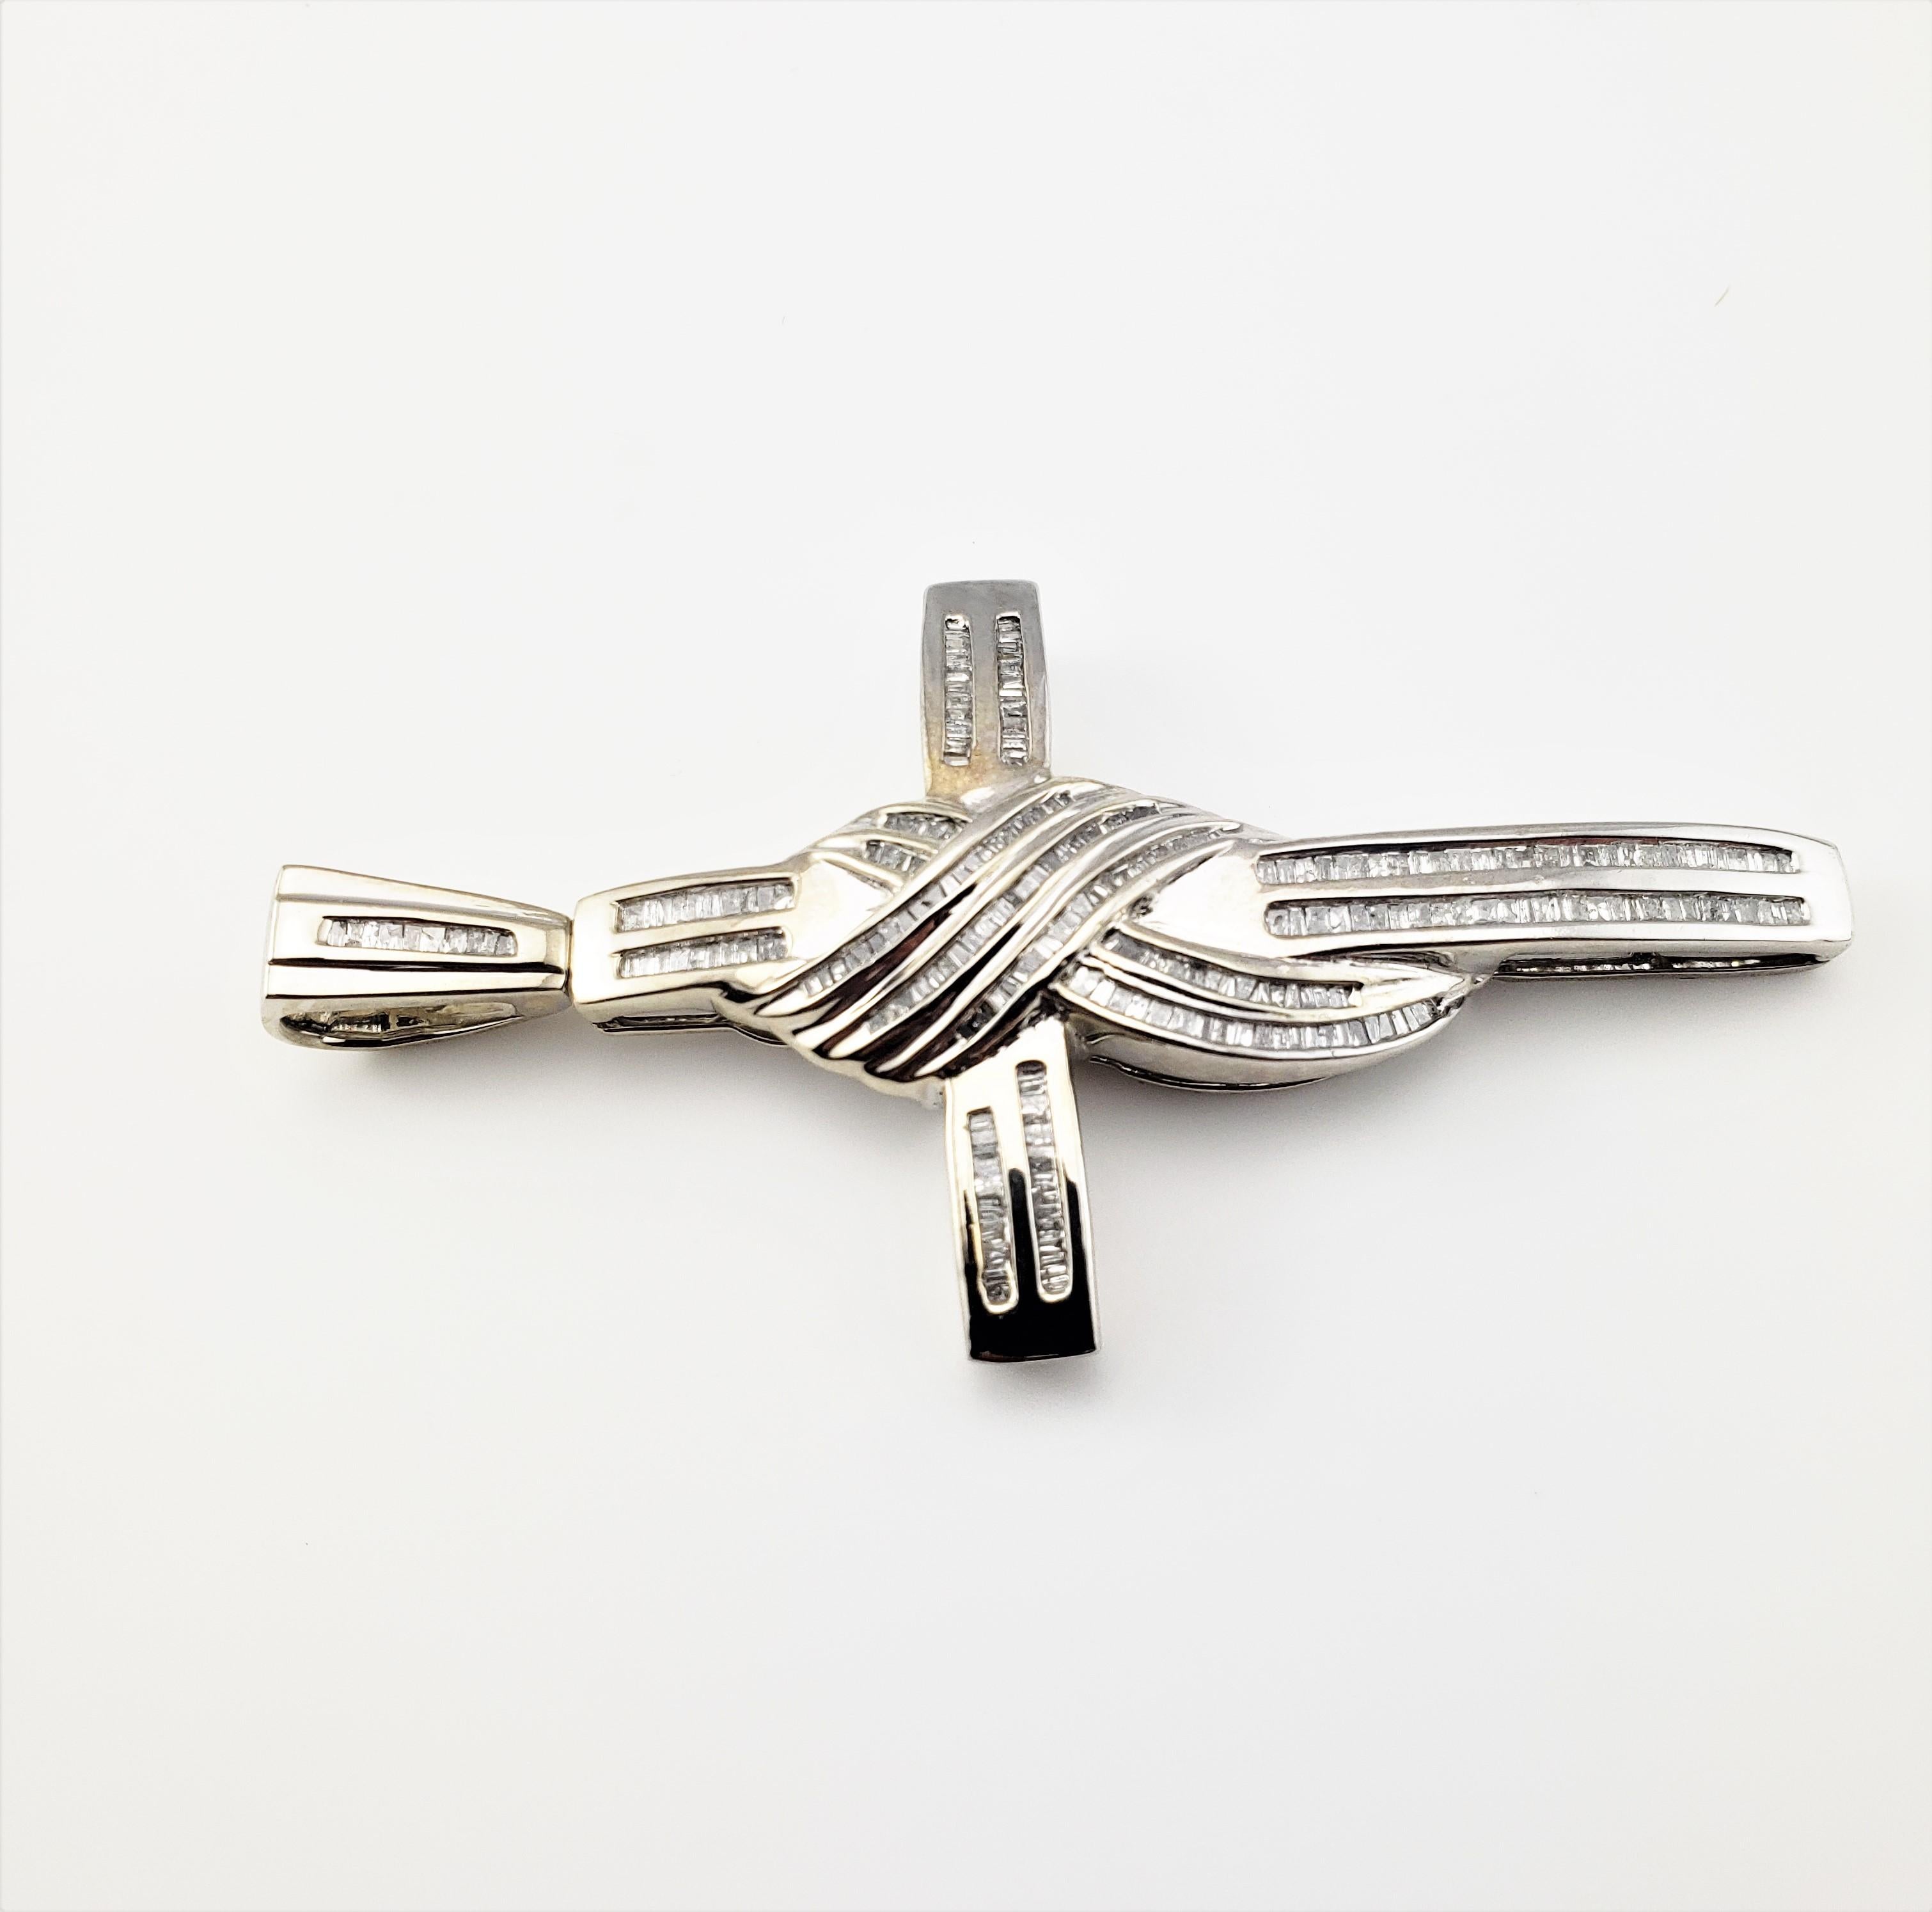 Vintage 10 Karat White Gold and Diamond Cross Pendant-

This stunning cross pendant features 243 baguette diamonds set in beautifully detailed 10K white gold.

Approximate total diamond weight: 1.75 cts.

Diamond color: I

Diamond clarity: